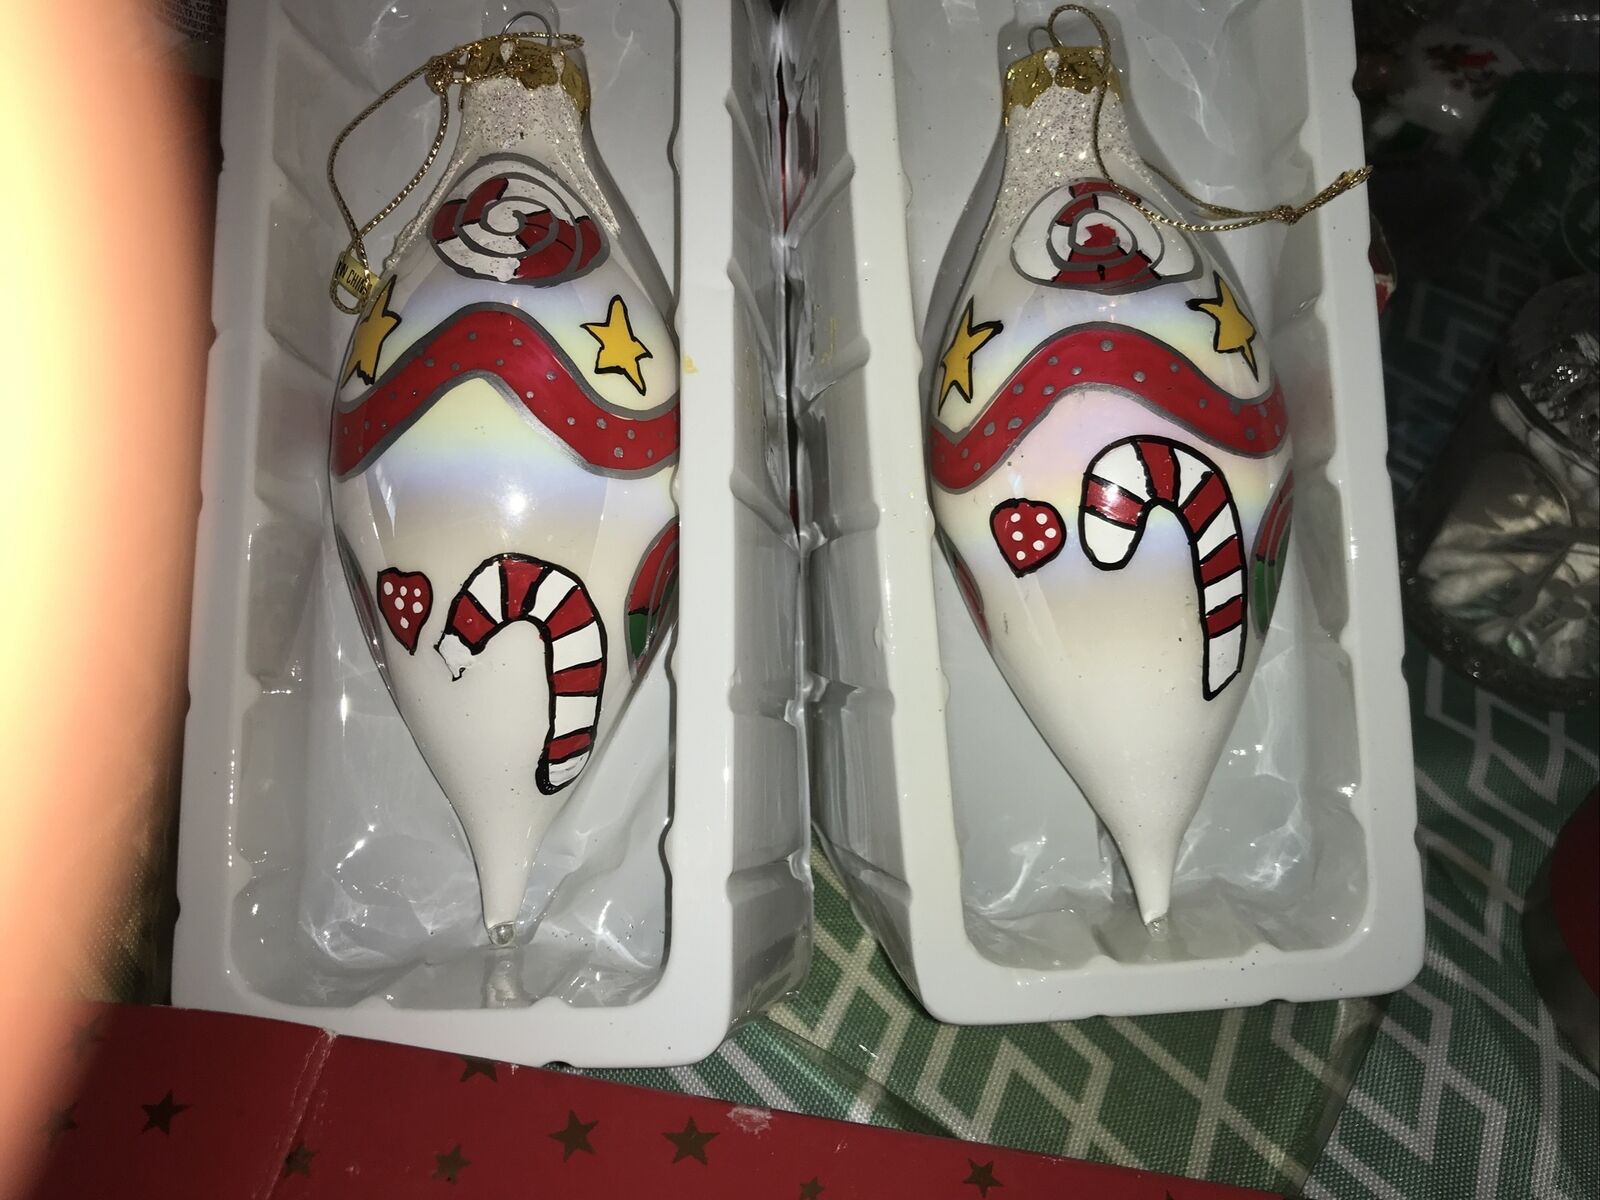 Vintage Wards “Montgomery Wards” Tear Drop Shaped Christmas Ornament Lot Of 2